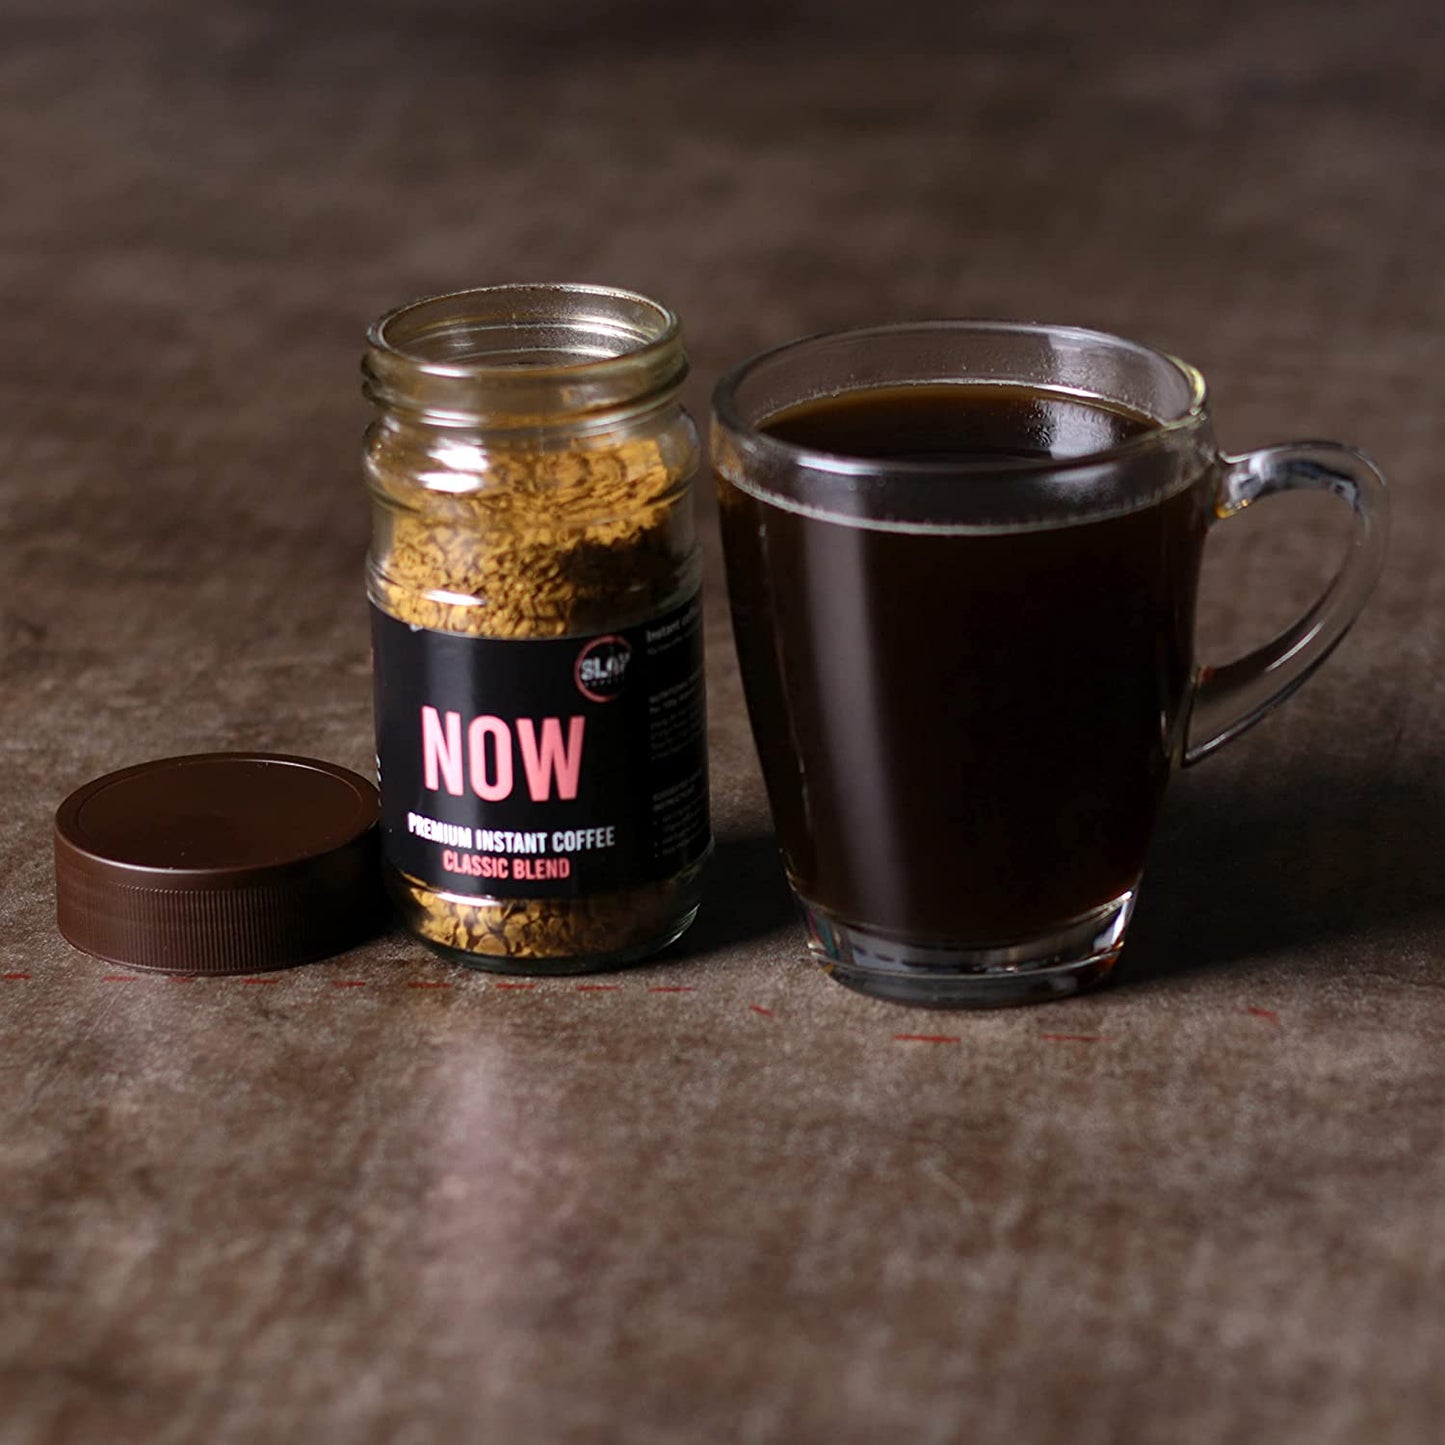 SLAY Now Premium Instant Coffee | No Chicory 100% Pure Coffee | 50g Jar | Pack of 2 | No Equipment Needed | Classic Blend